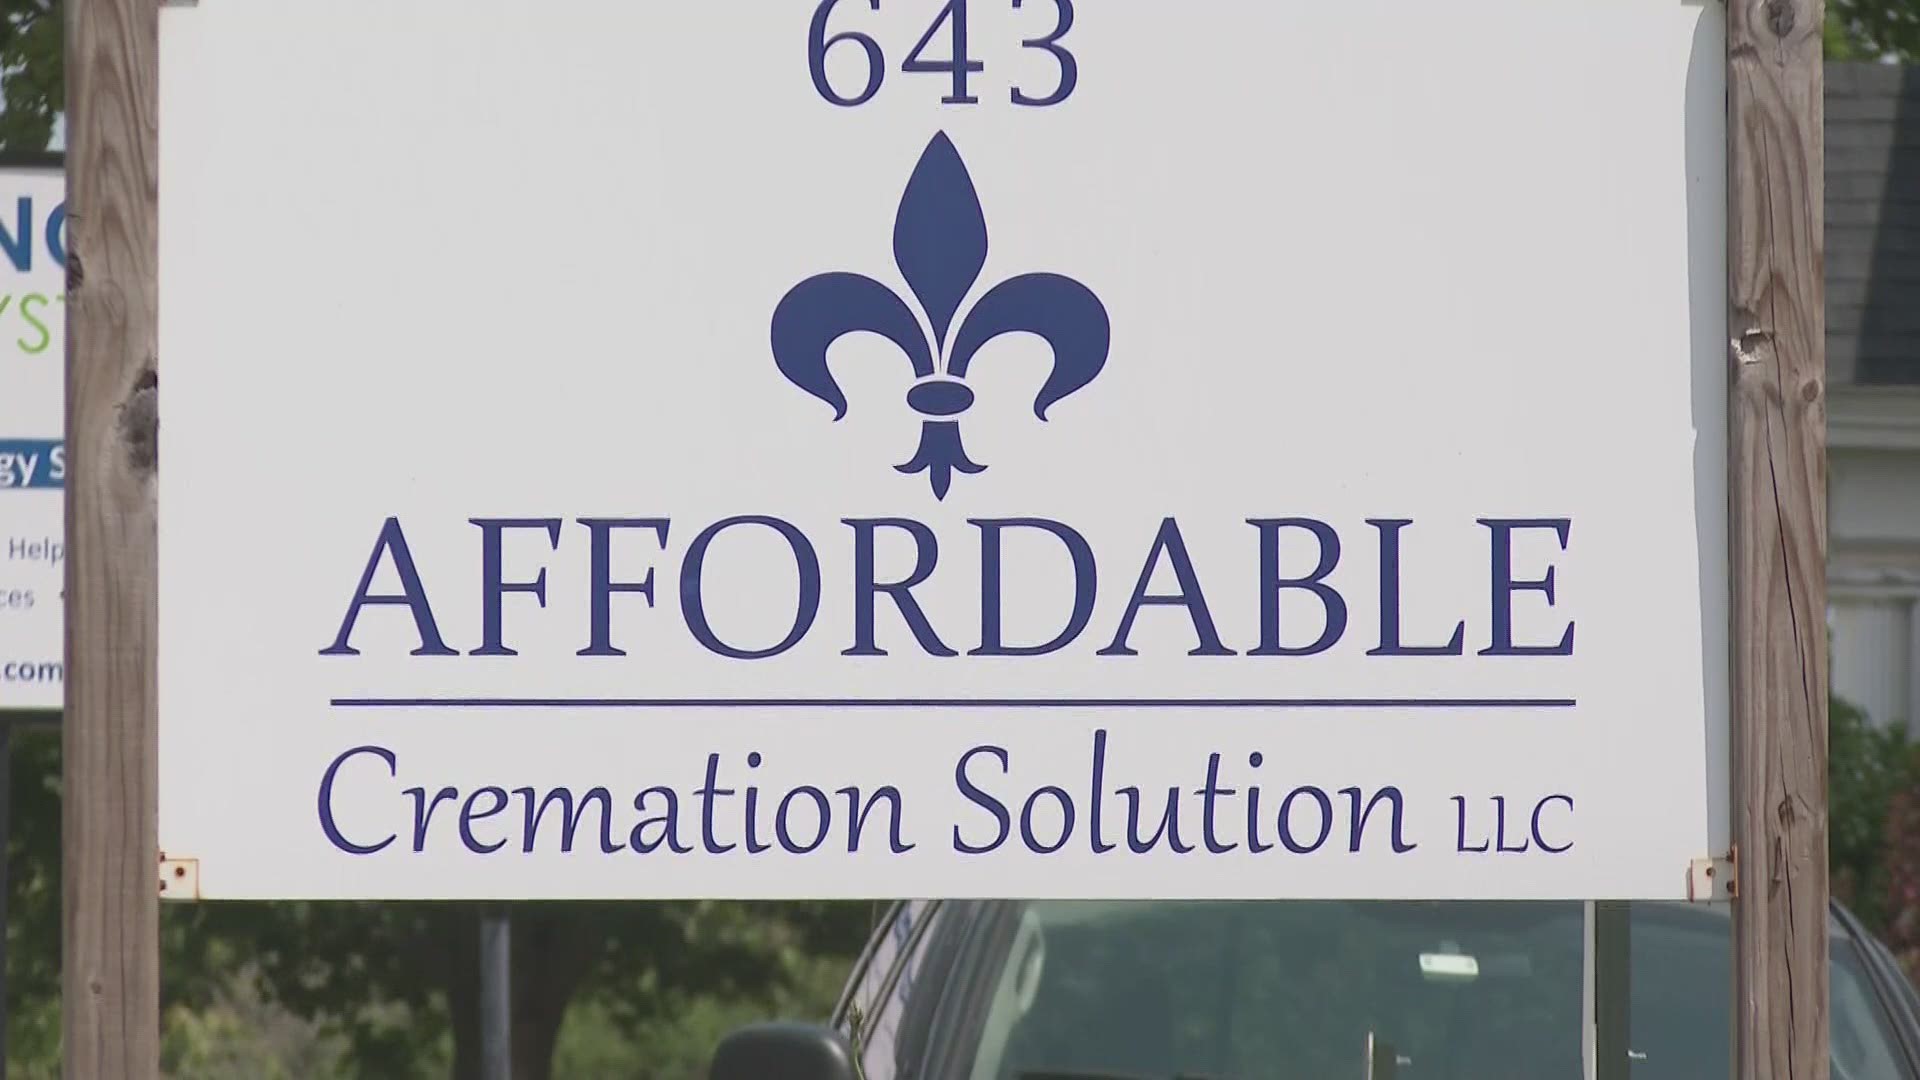 Former customers of Affordable Cremation Solution LLC filed complaints they didn't get the remains of their loved ones back.